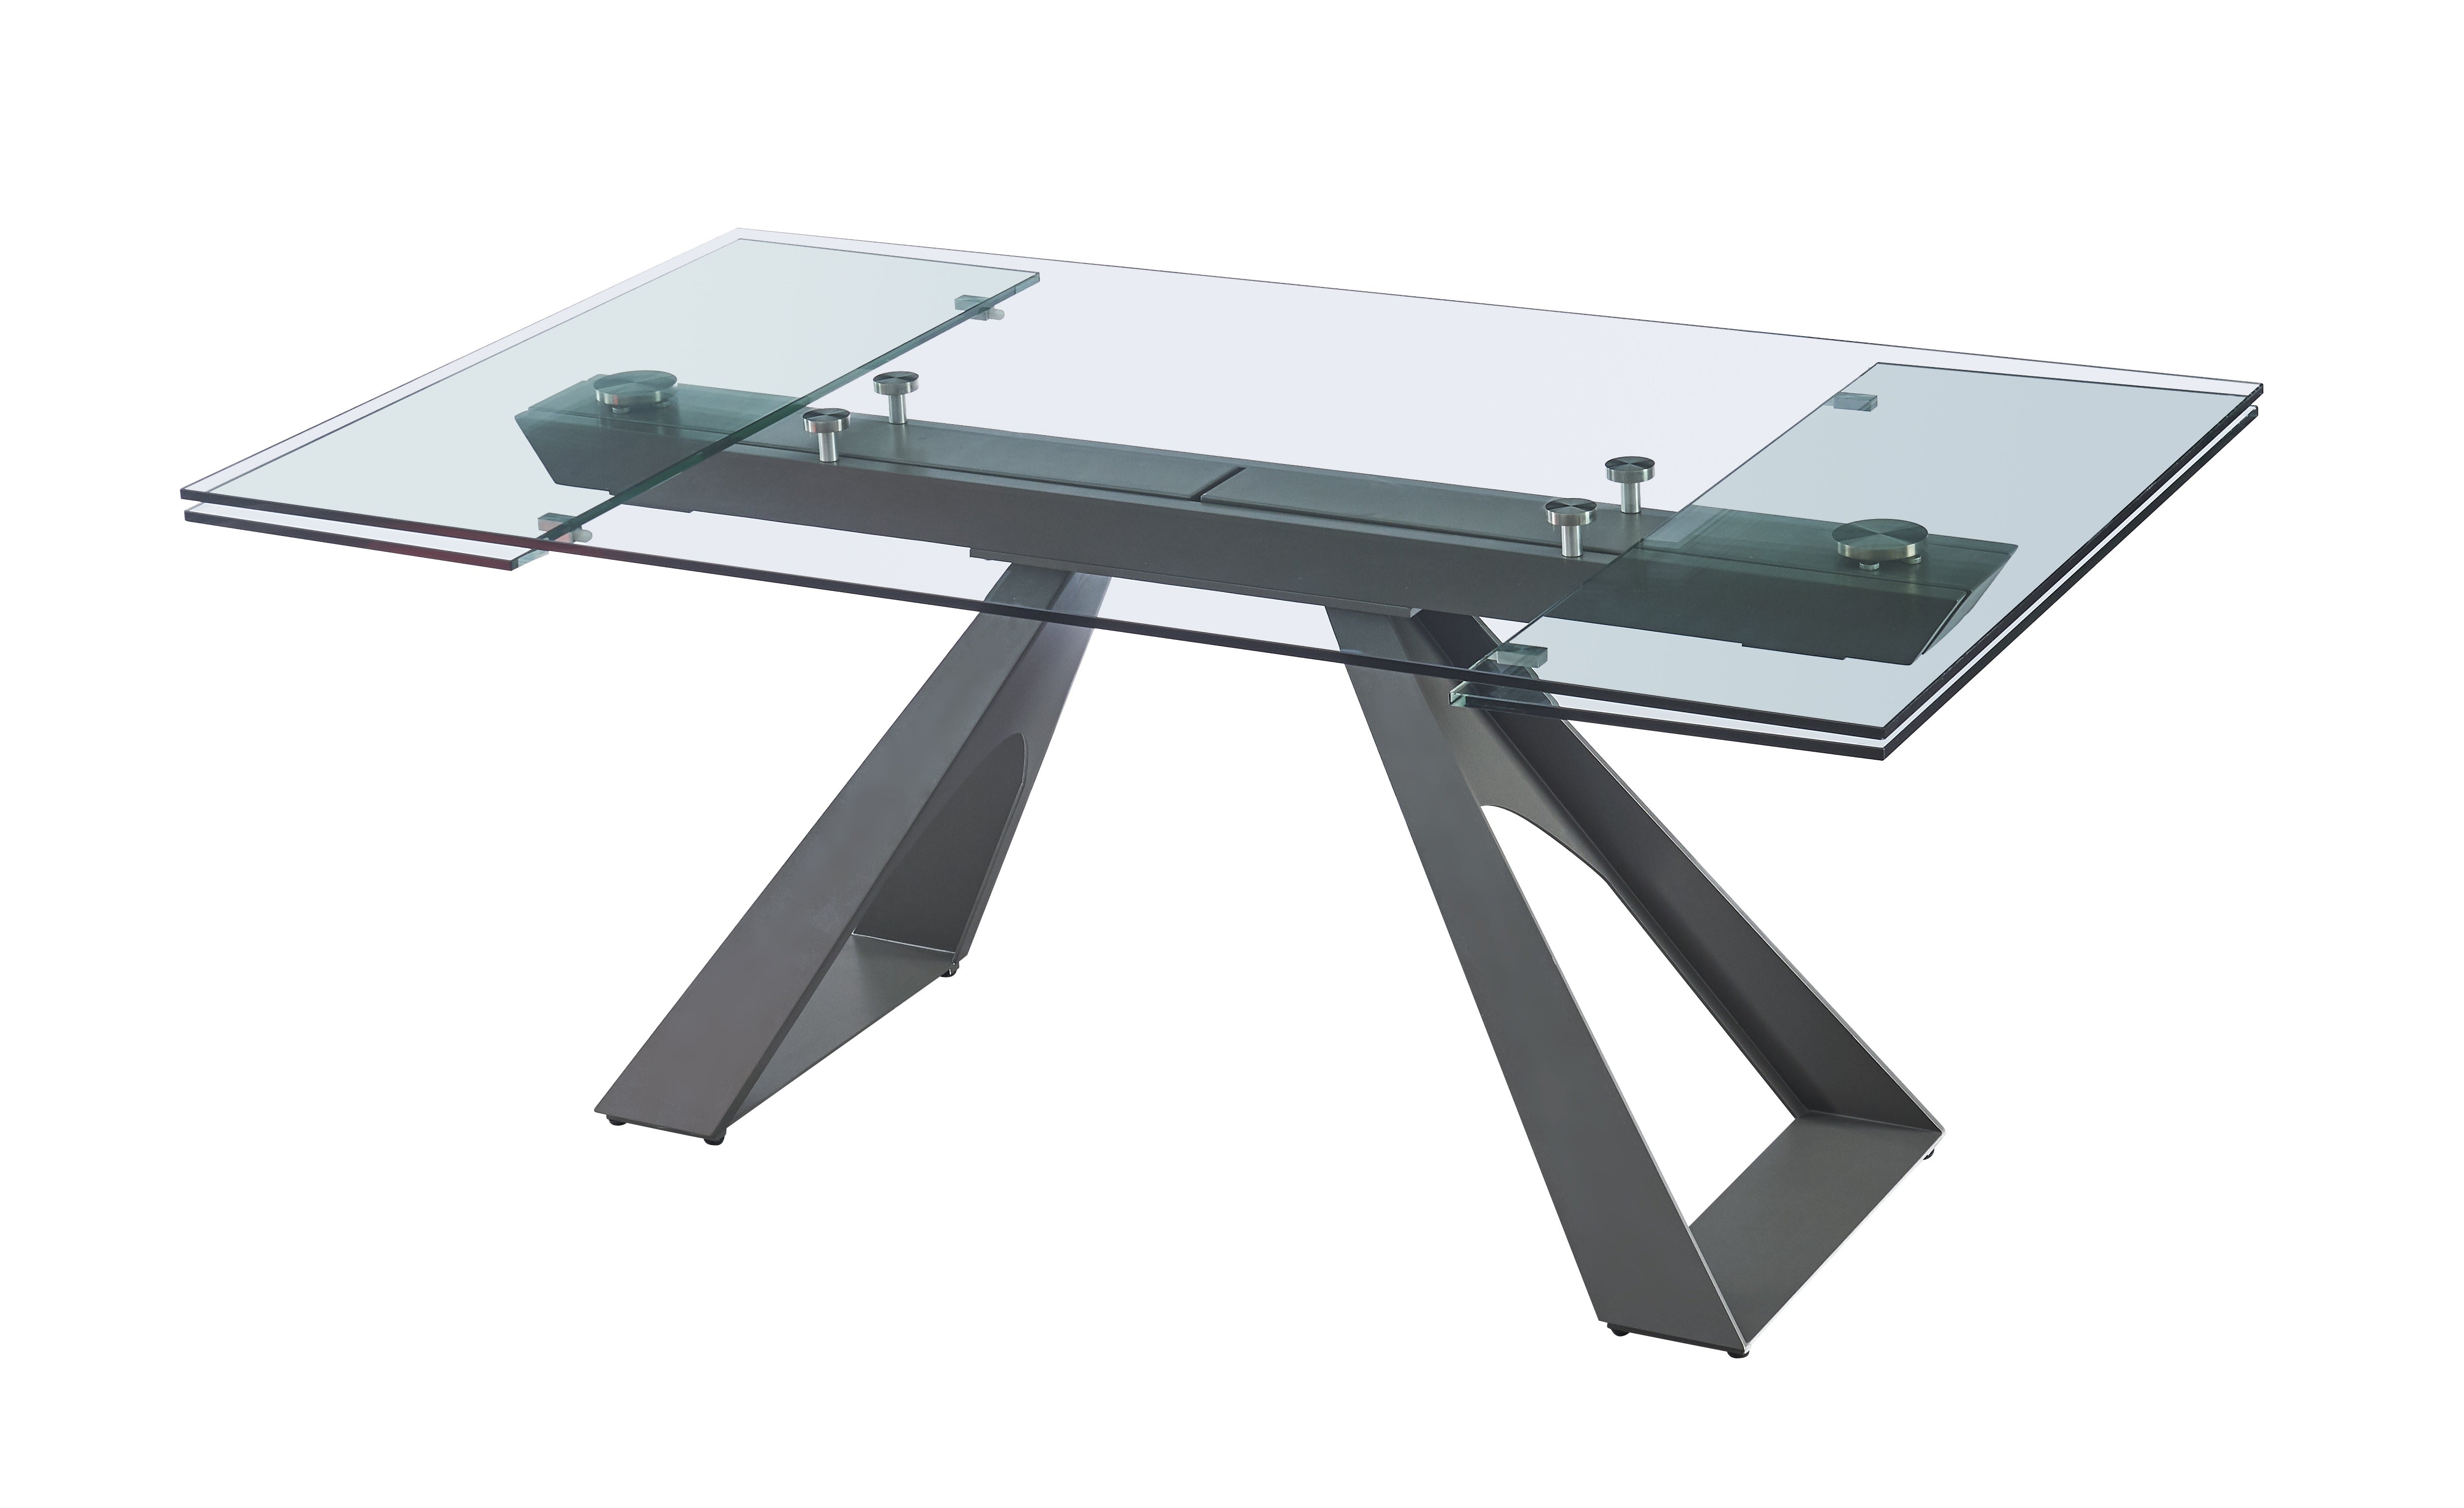 San Diego Extensions Dining Table | J&M Furniture